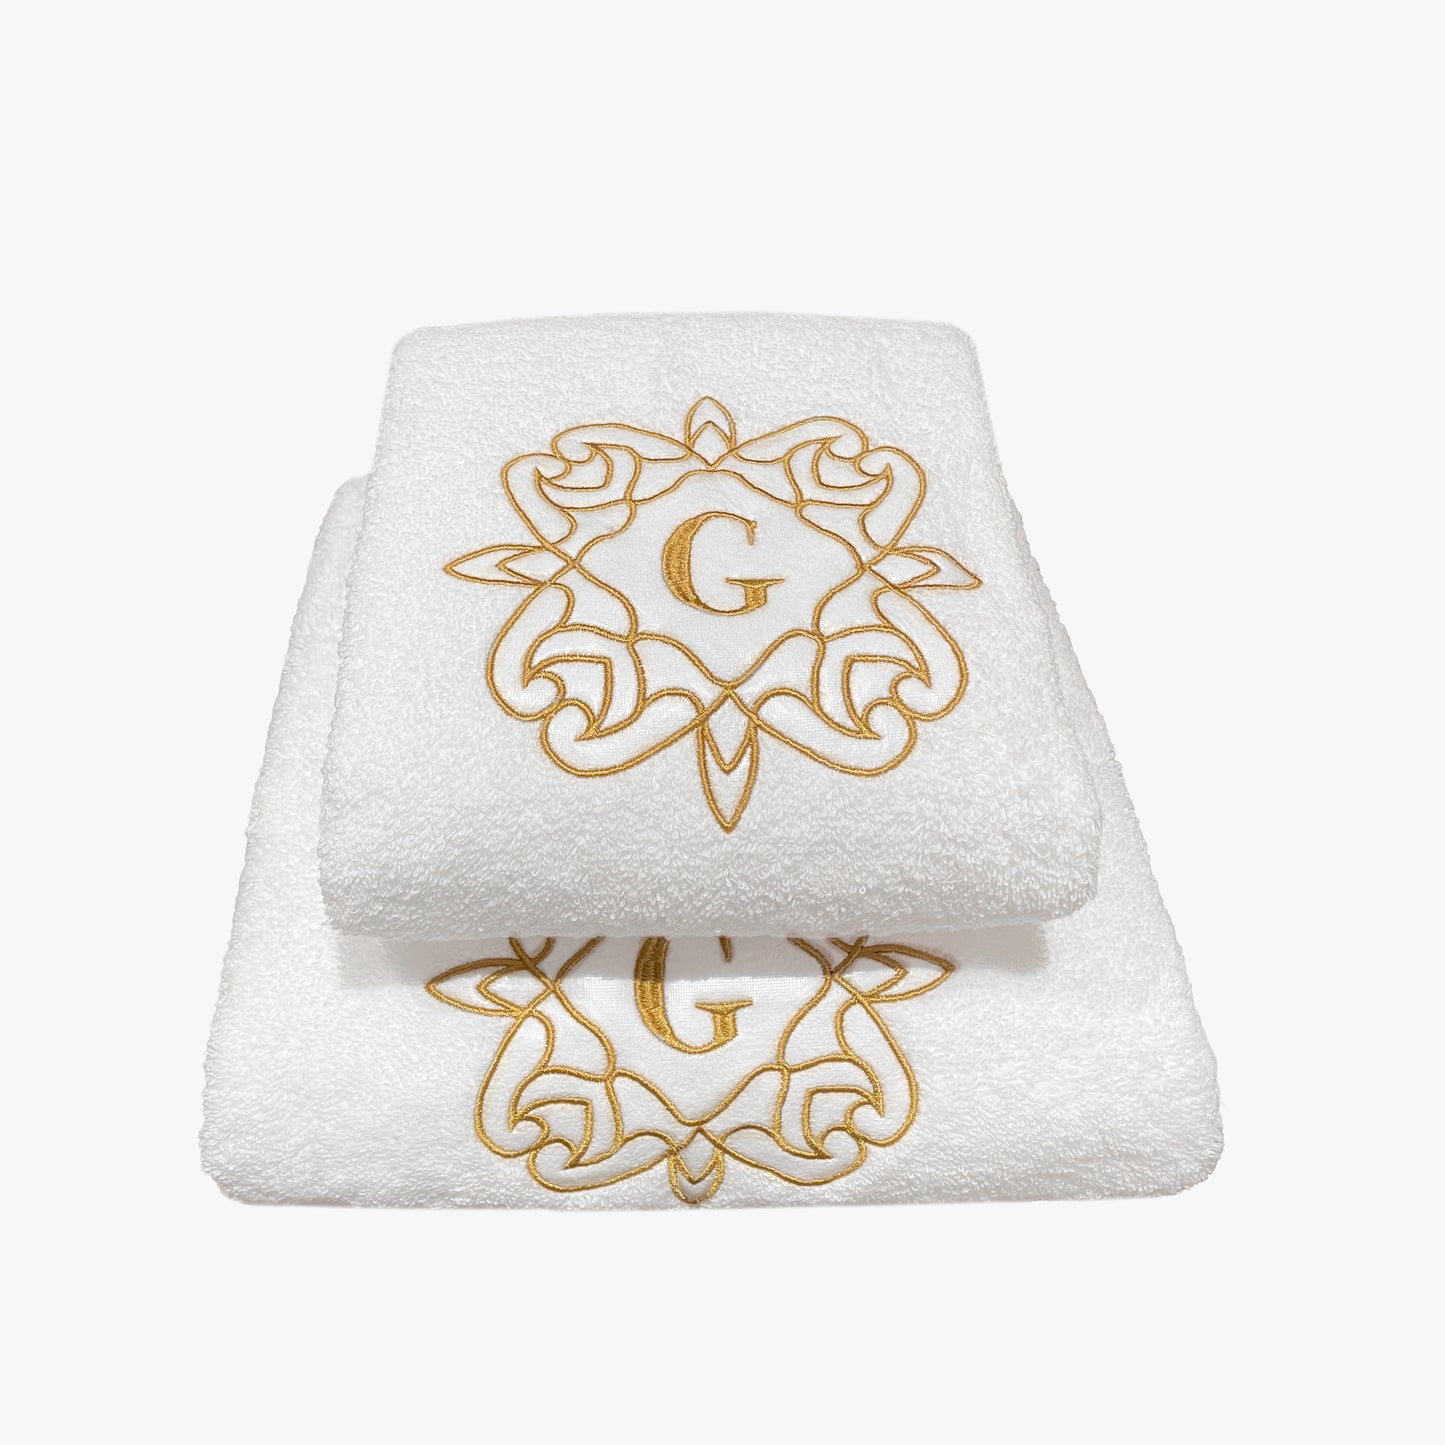 Initial(s) Gold Embroidery Luxury 100% Turkish Cotton Towel Sets (White)